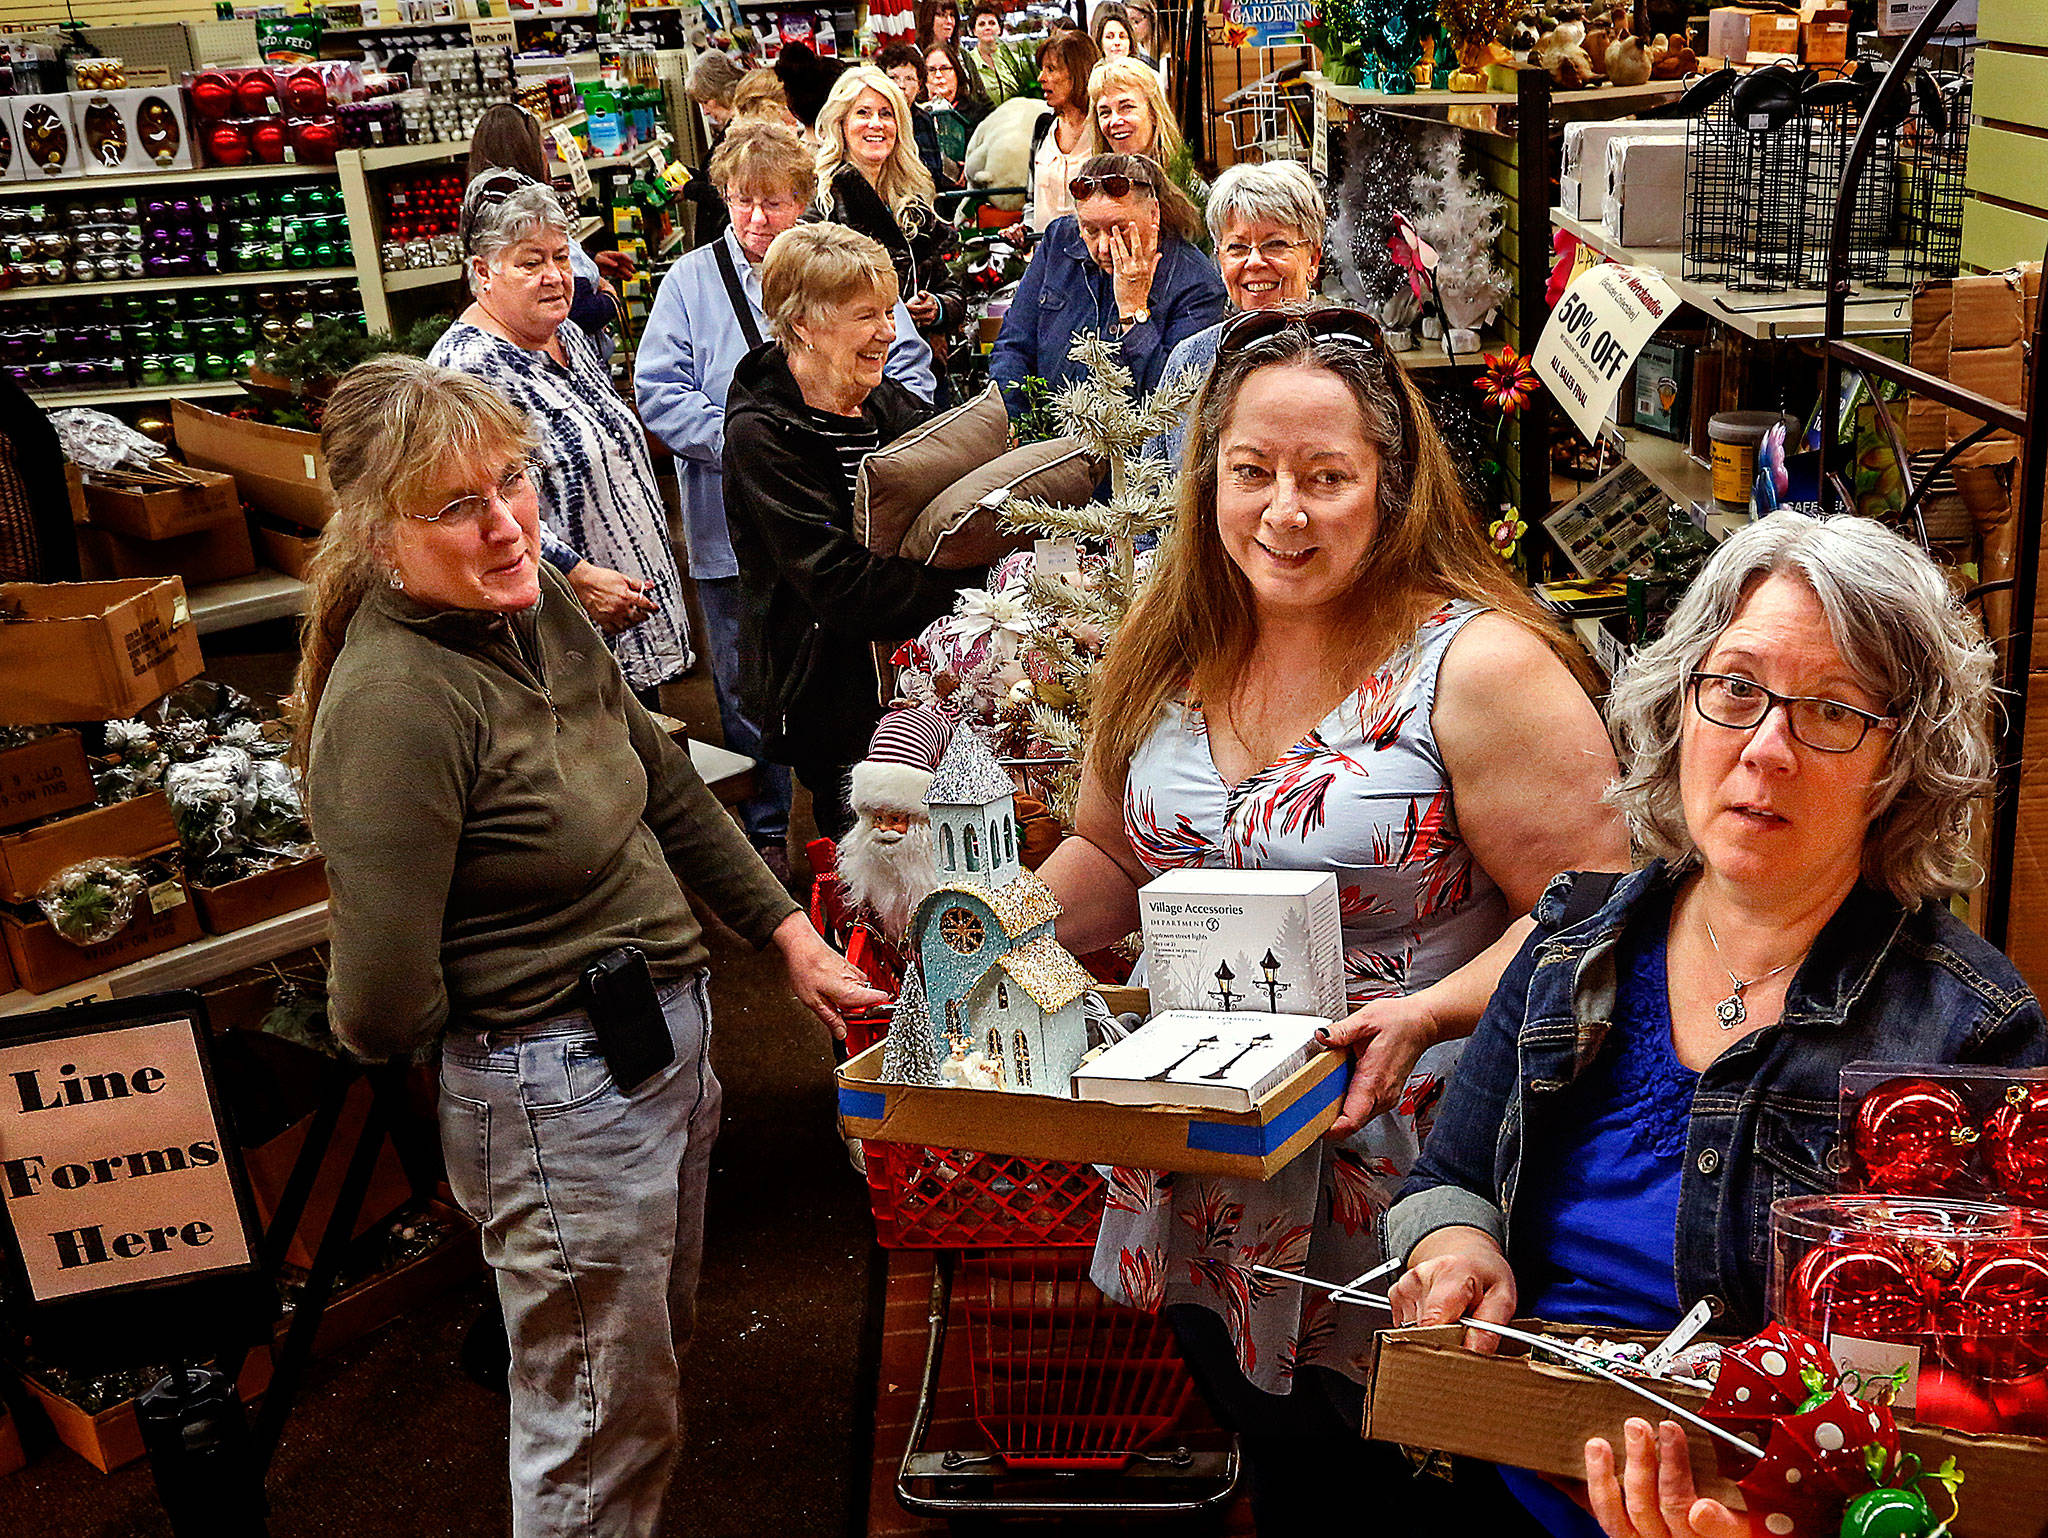 Bearing real treasure from a great store holding their biggest and last sale ever, Monika Clough of Edmonds (left), Angie Hoffman of Smokey Point and Tami McKinley of Mountlake Terrace finally near the check out counter Friday at Wight’s Home & Garden in Lynnwood. (Dan Bates / The Herald)